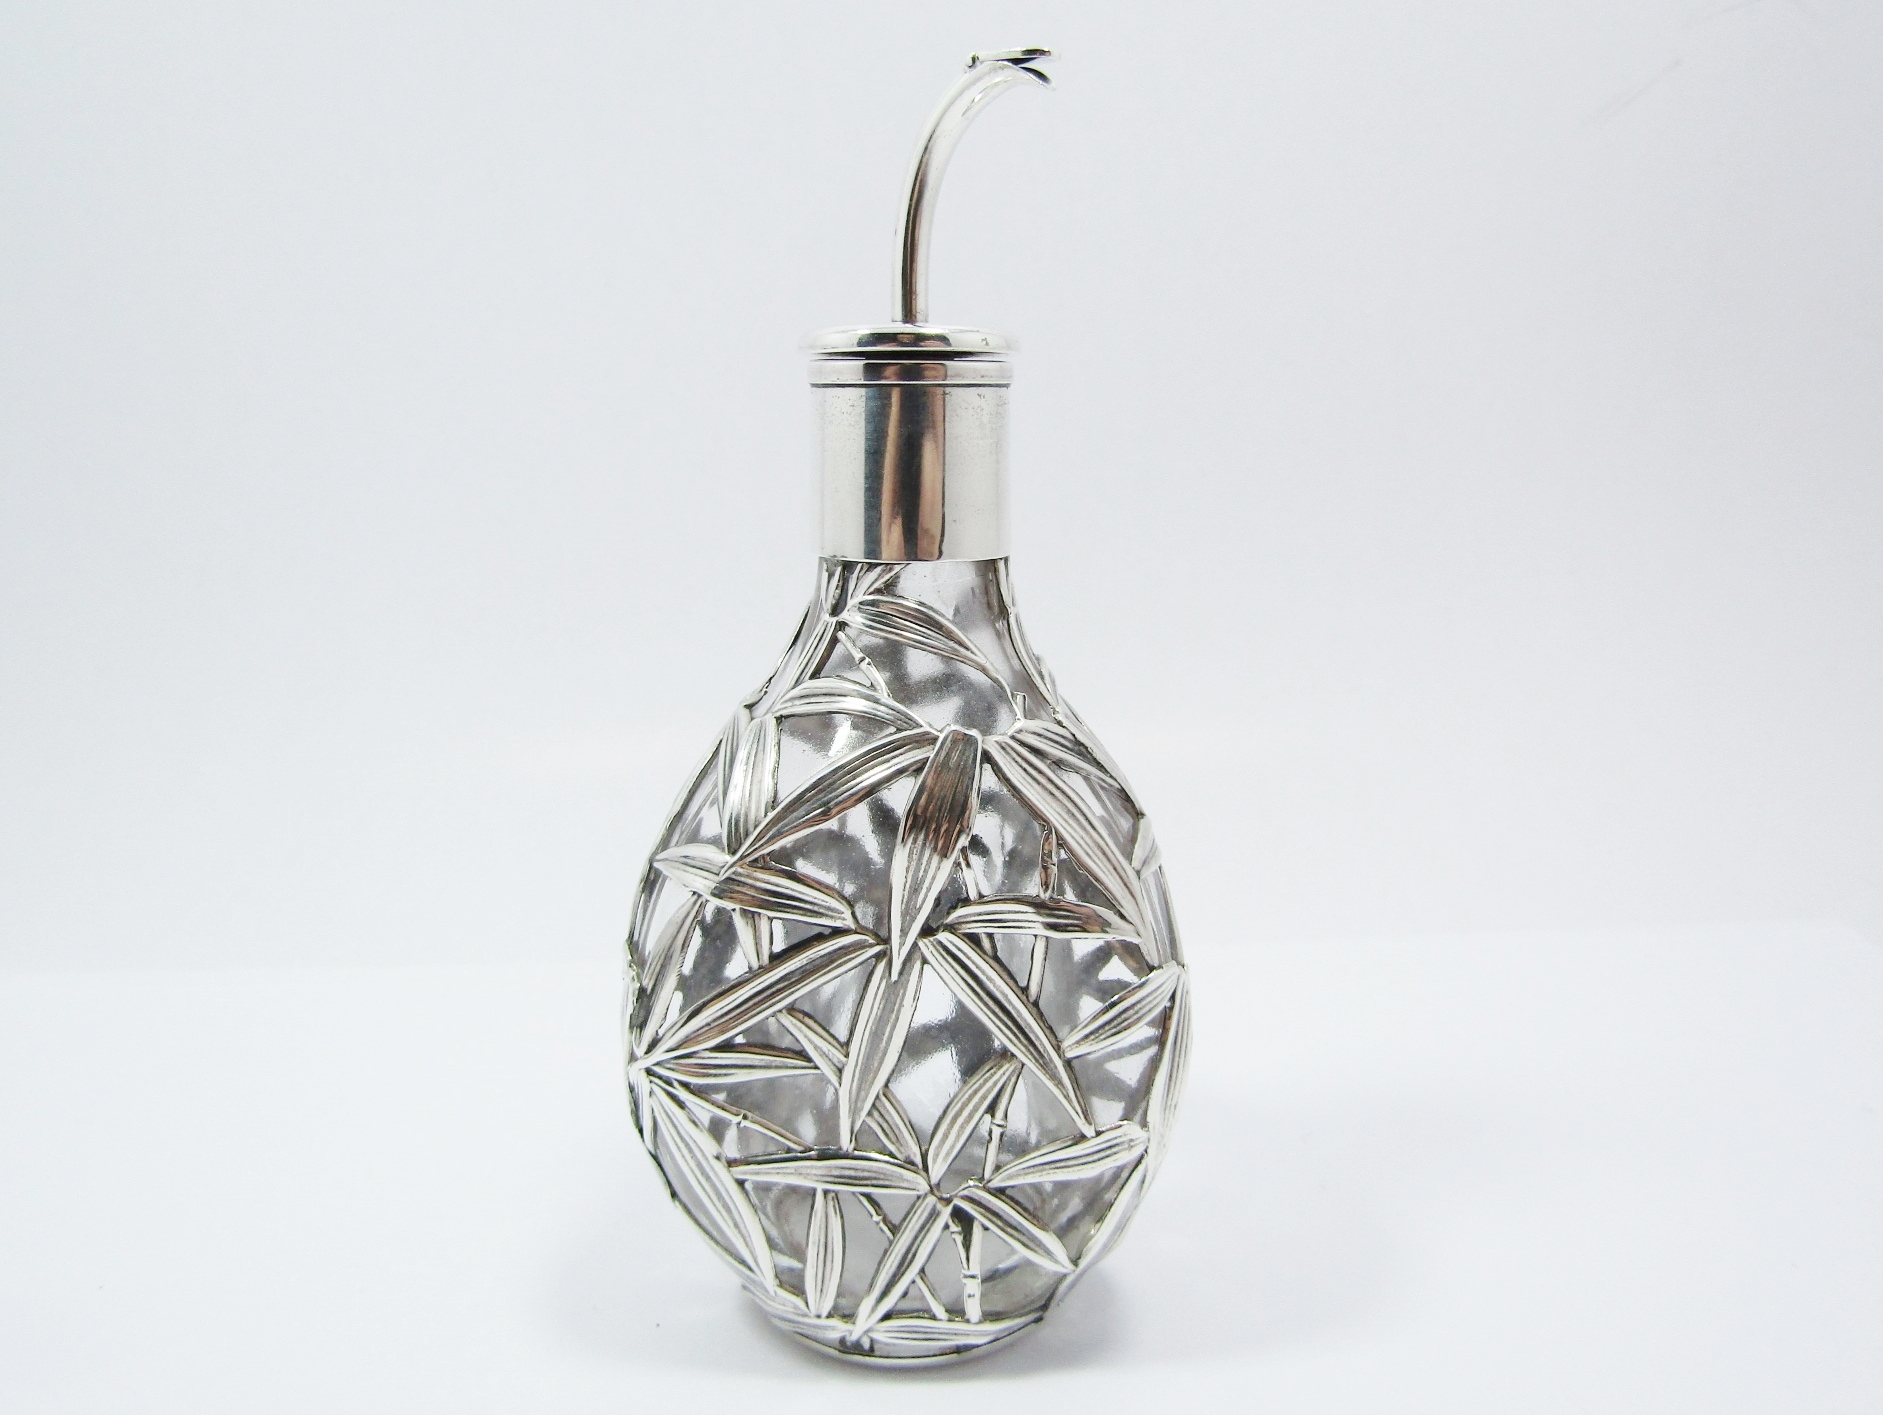 Rare Find! Antique/Vintage Chinese Silver & Glass Pinch Bottle Pourer